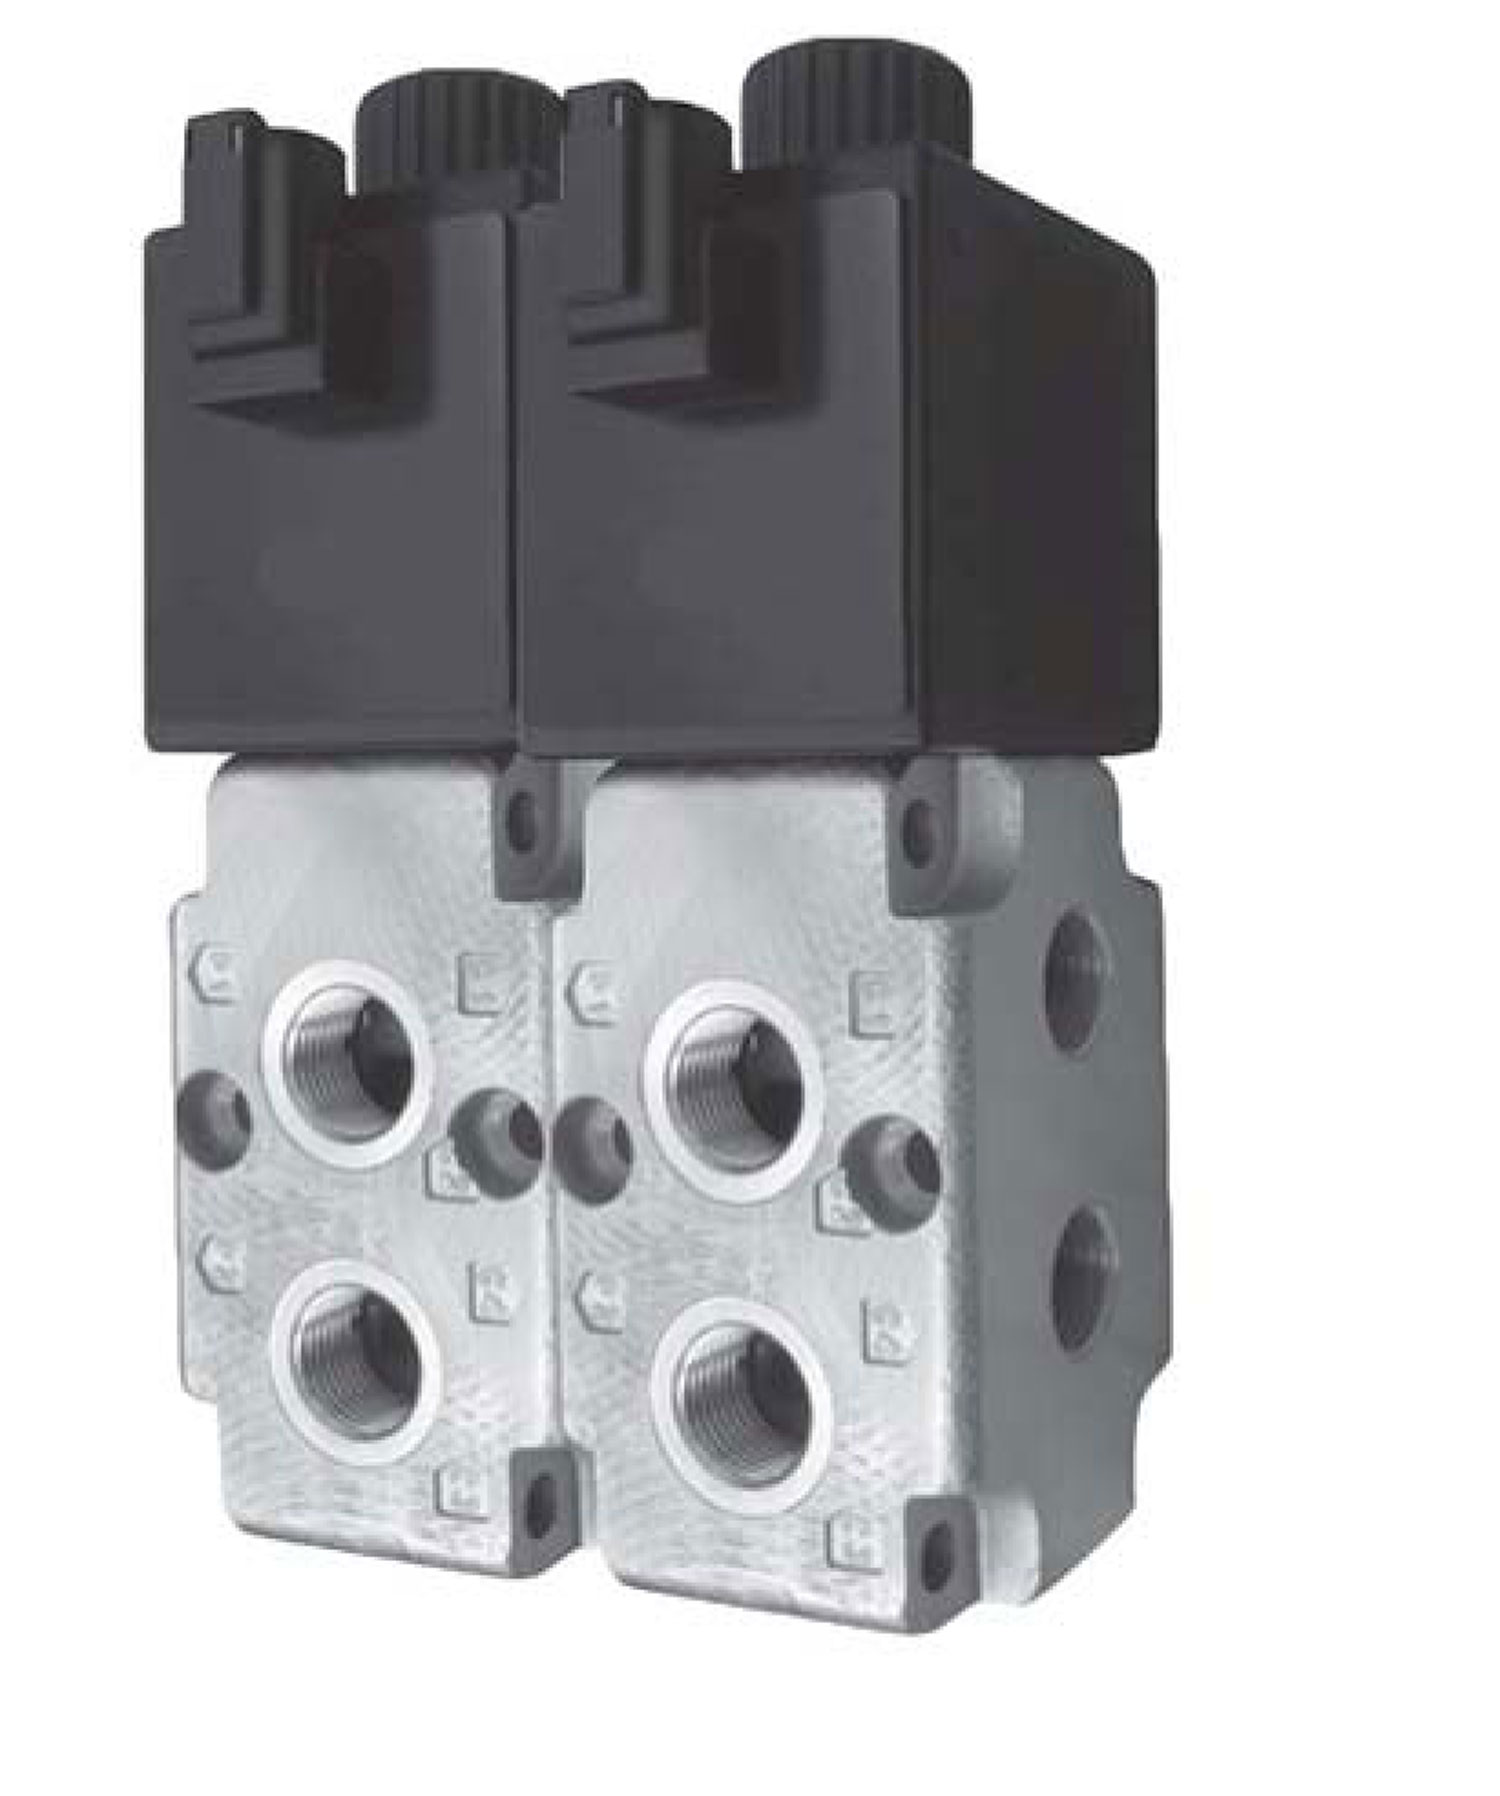 Double Valve Kit - Kit Contains Two Stacked Valves 24 GPM Capacity And Fittings, Switch, Wiring Harness, And Brackets